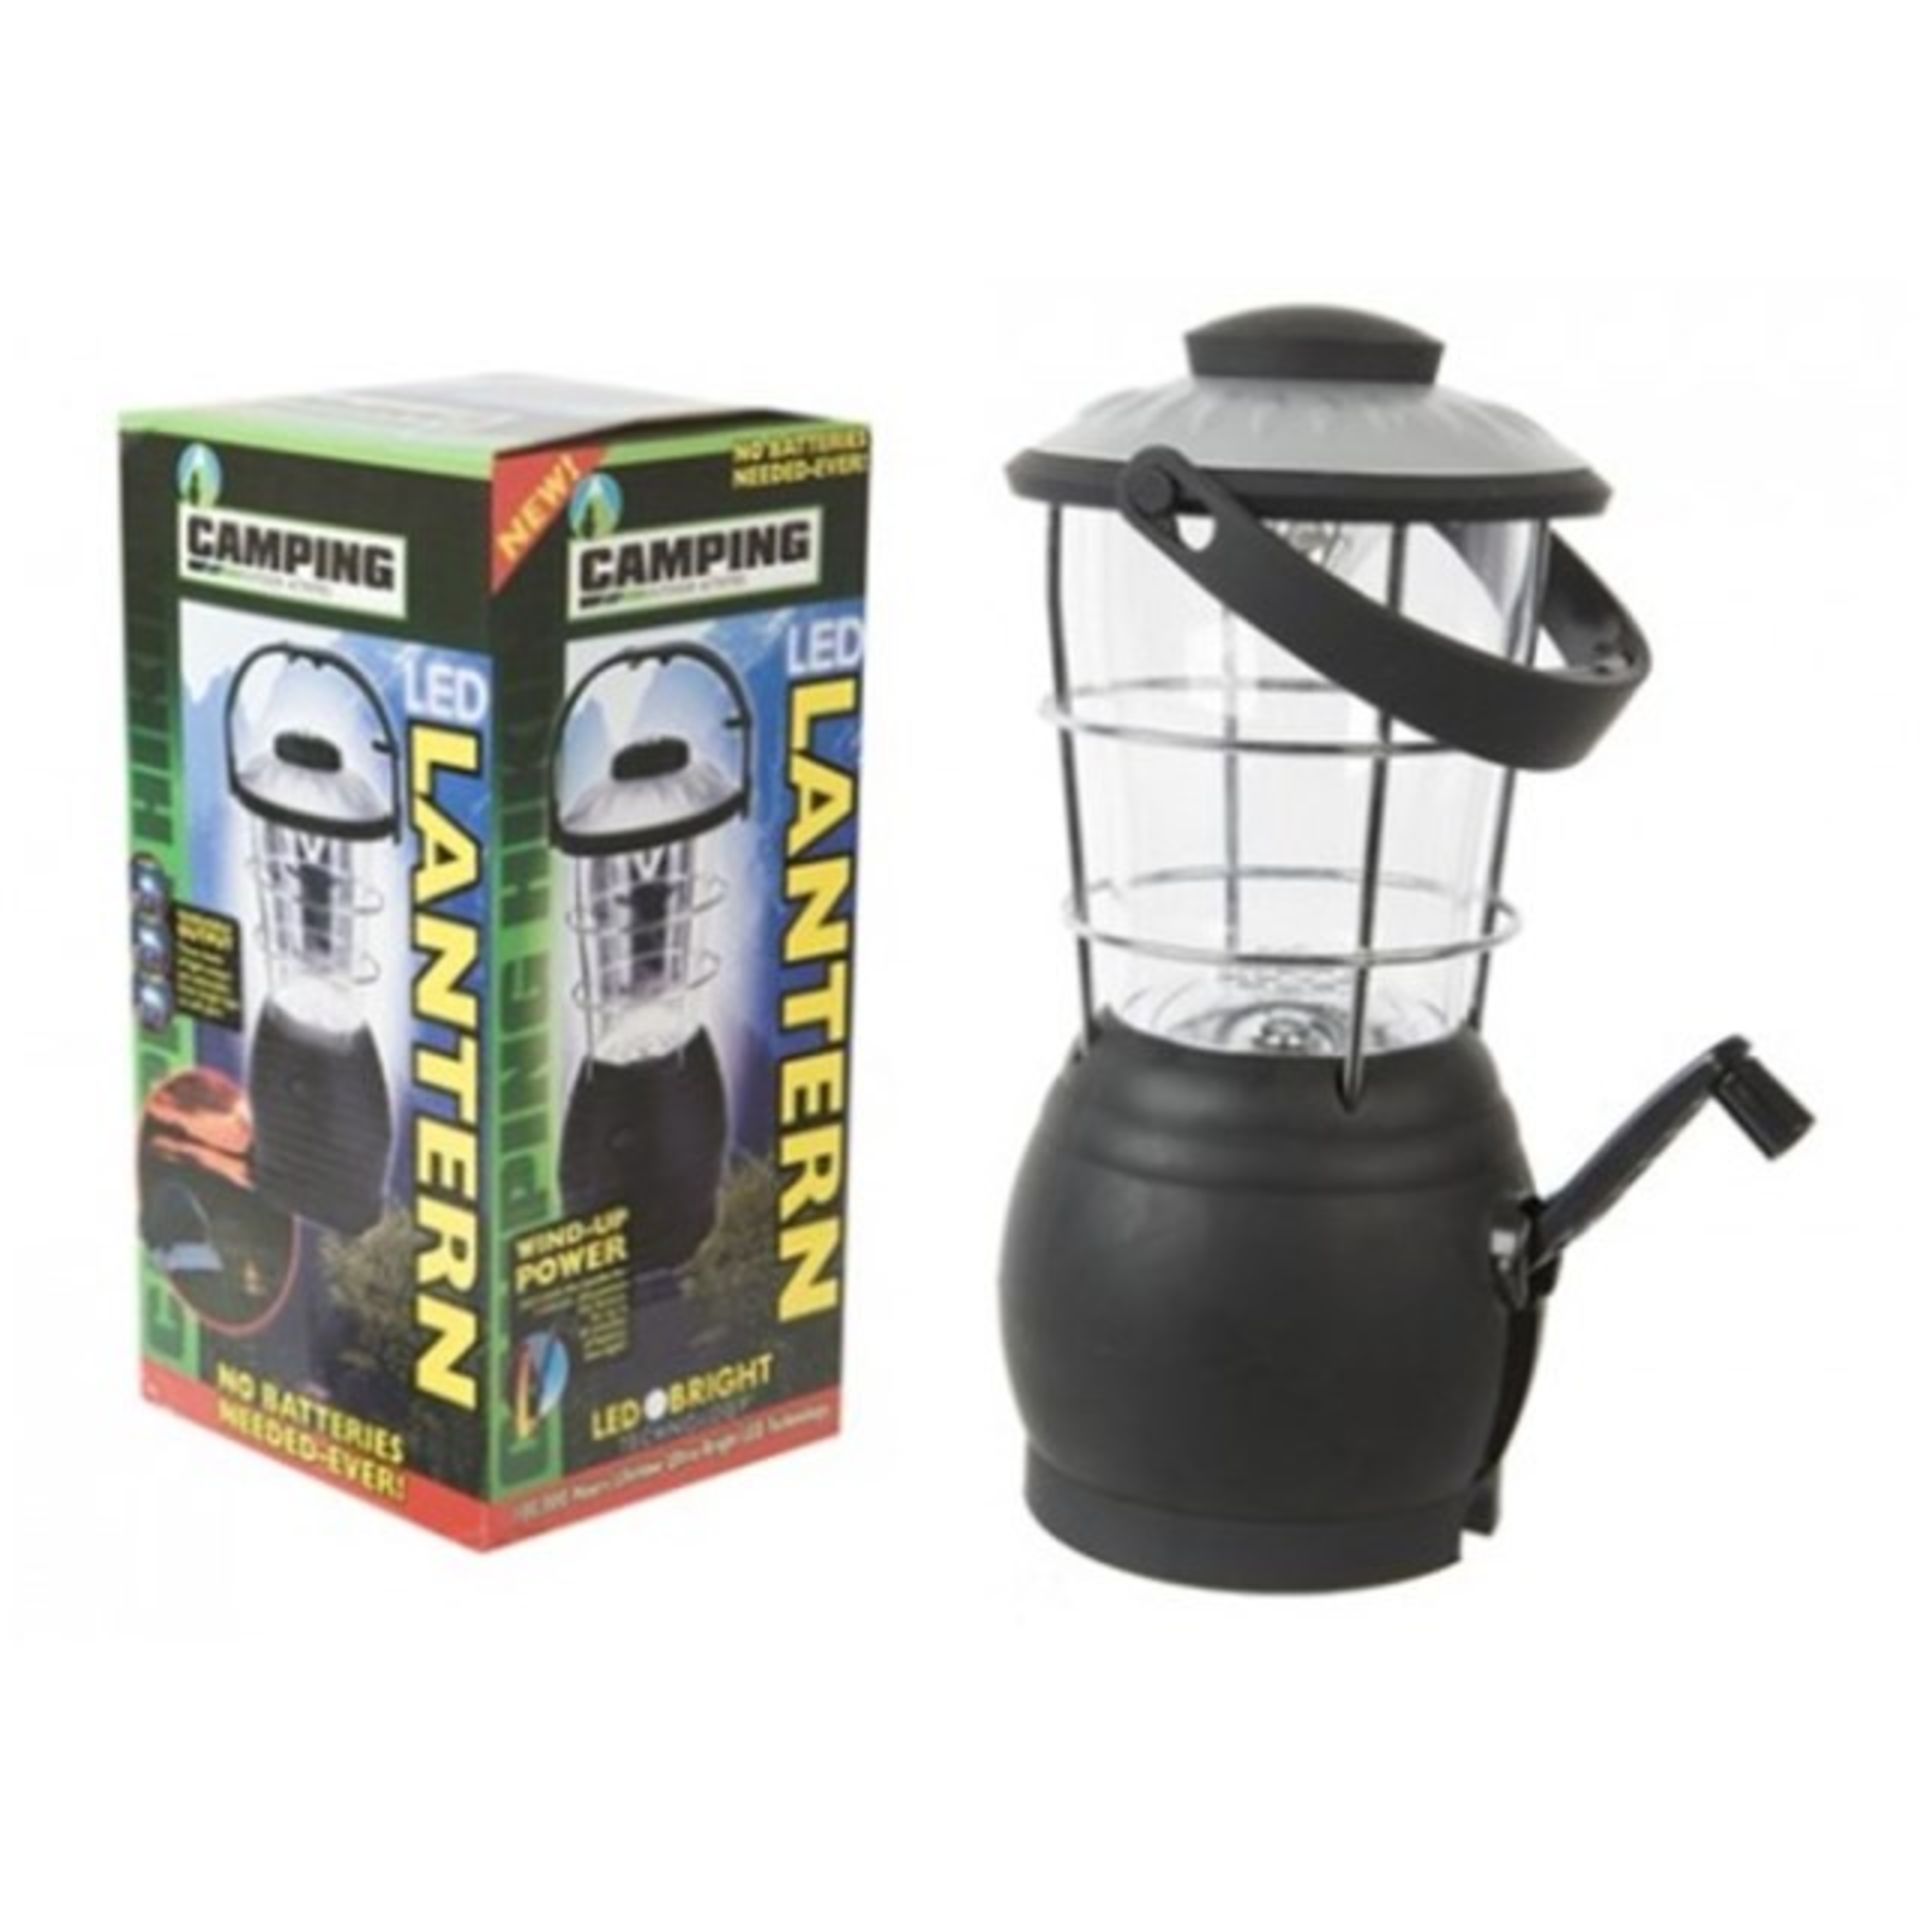 V *TRADE QTY* Brand New 12 LED Wind Up Camping Lantern In Box RRP24.99 X 7 YOUR BID PRICE TO BE